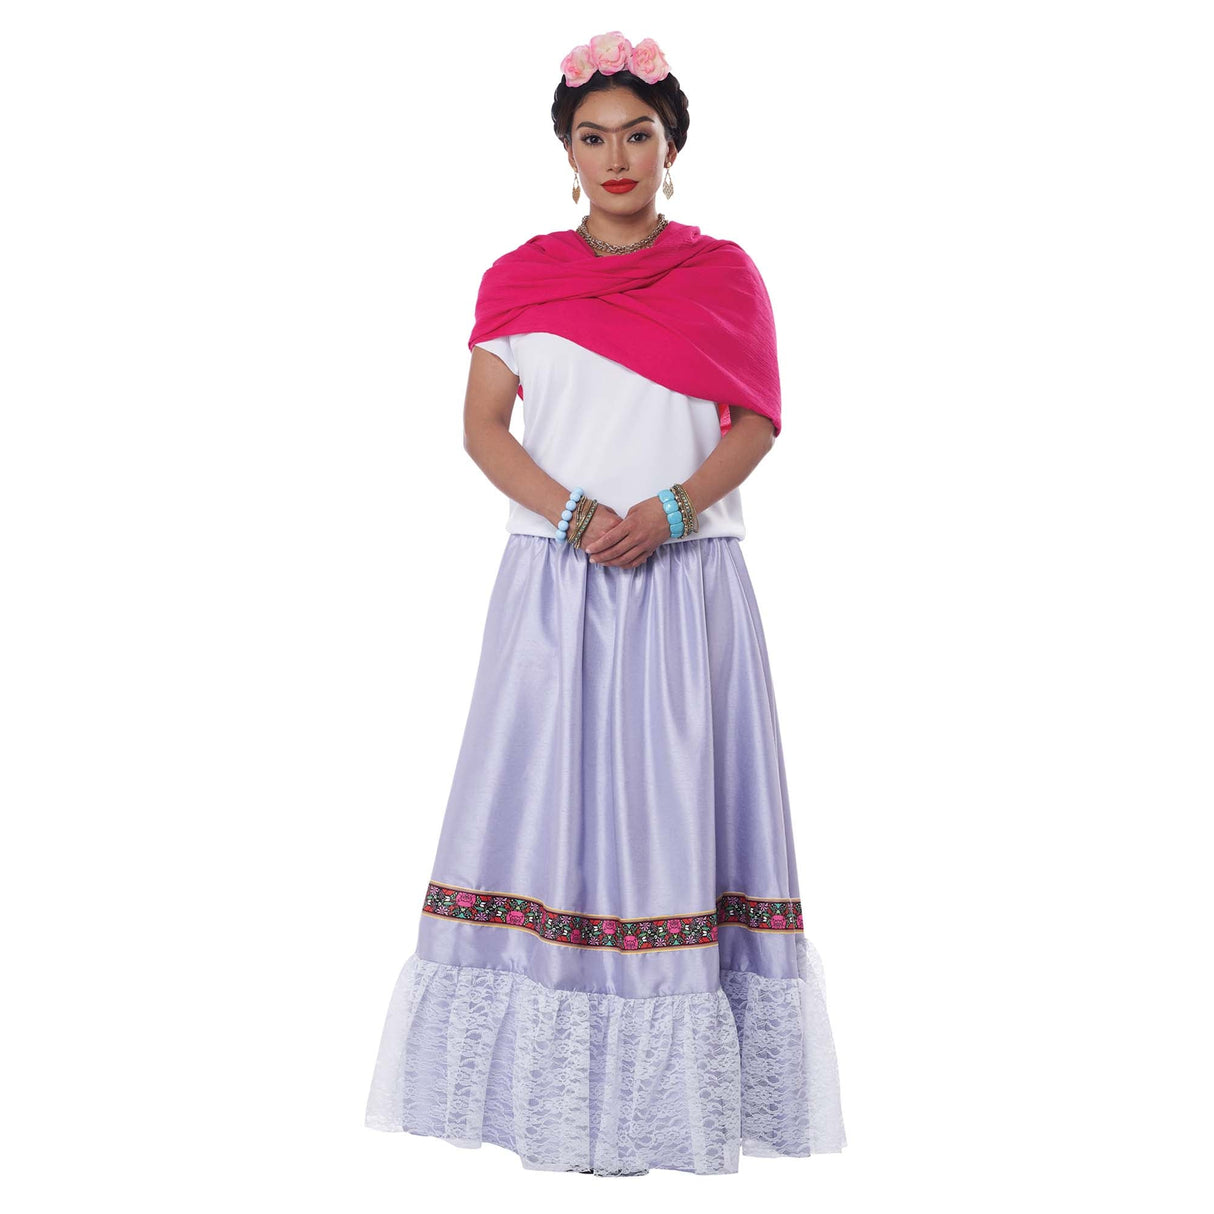 CALIFORNIA COSTUMES Costumes Mexican Folk Artist Costume for Adults, White Blouse and Purple Skirt